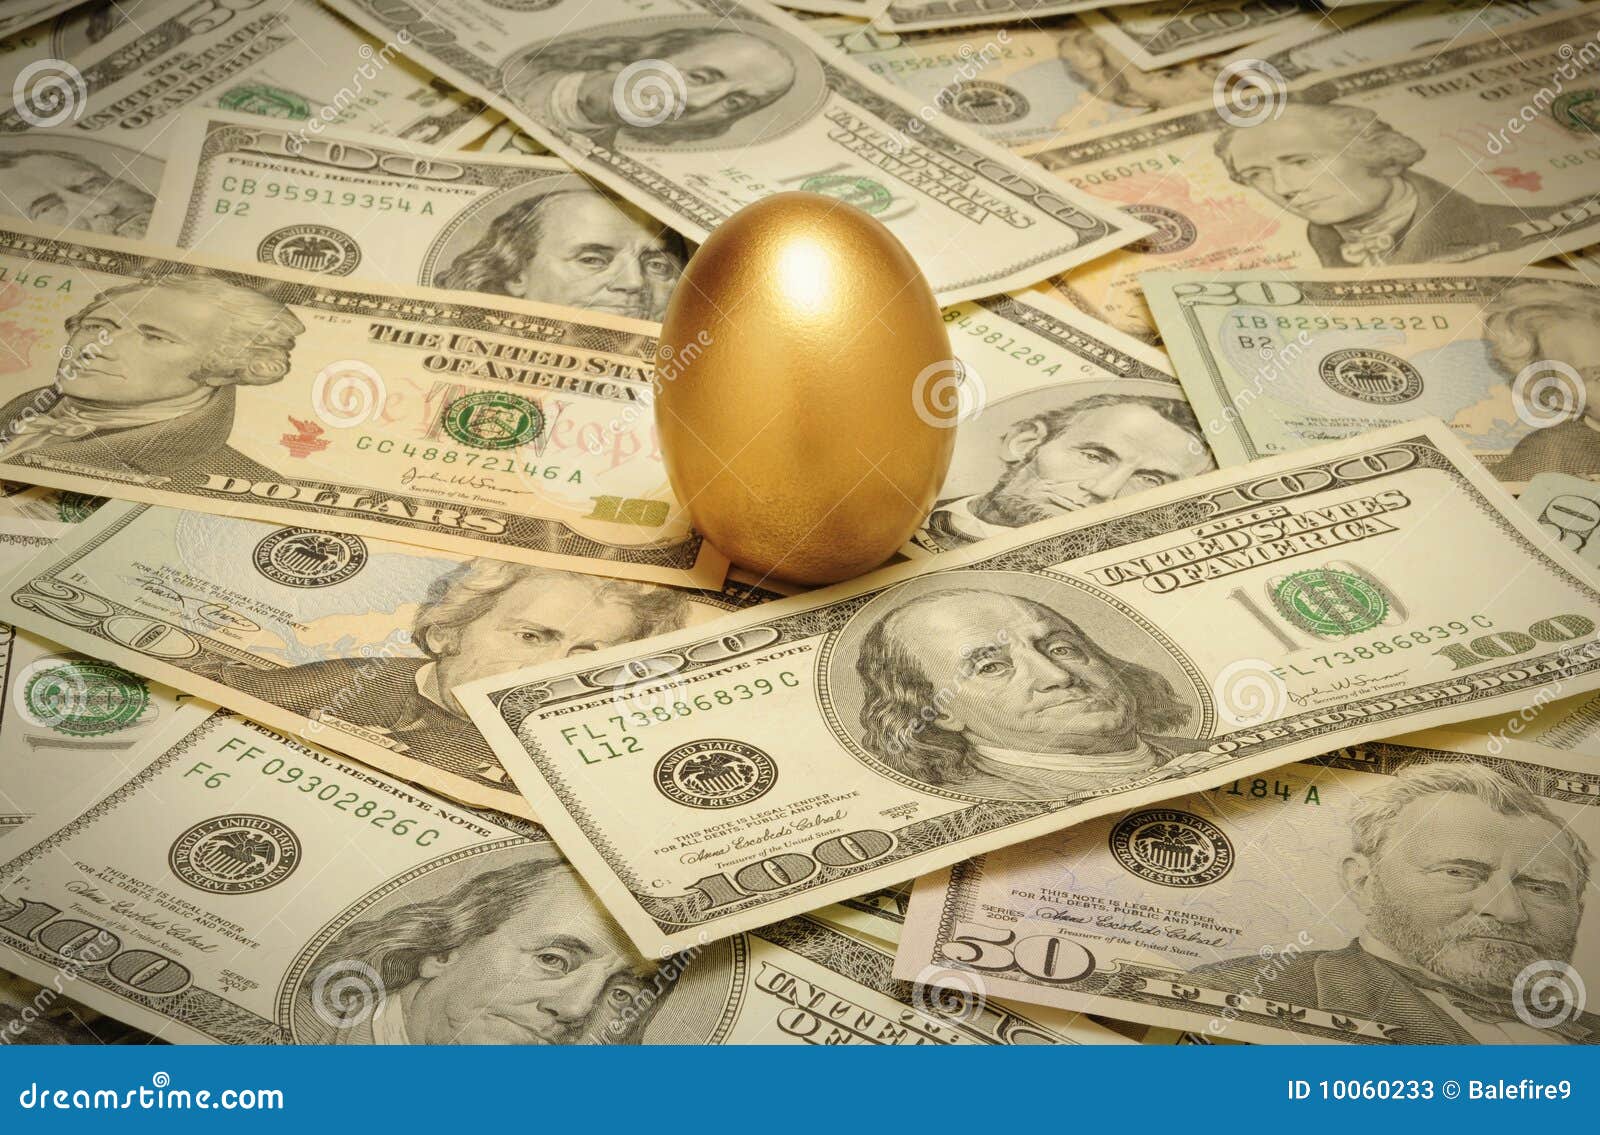 gold nest egg on a layer of cash